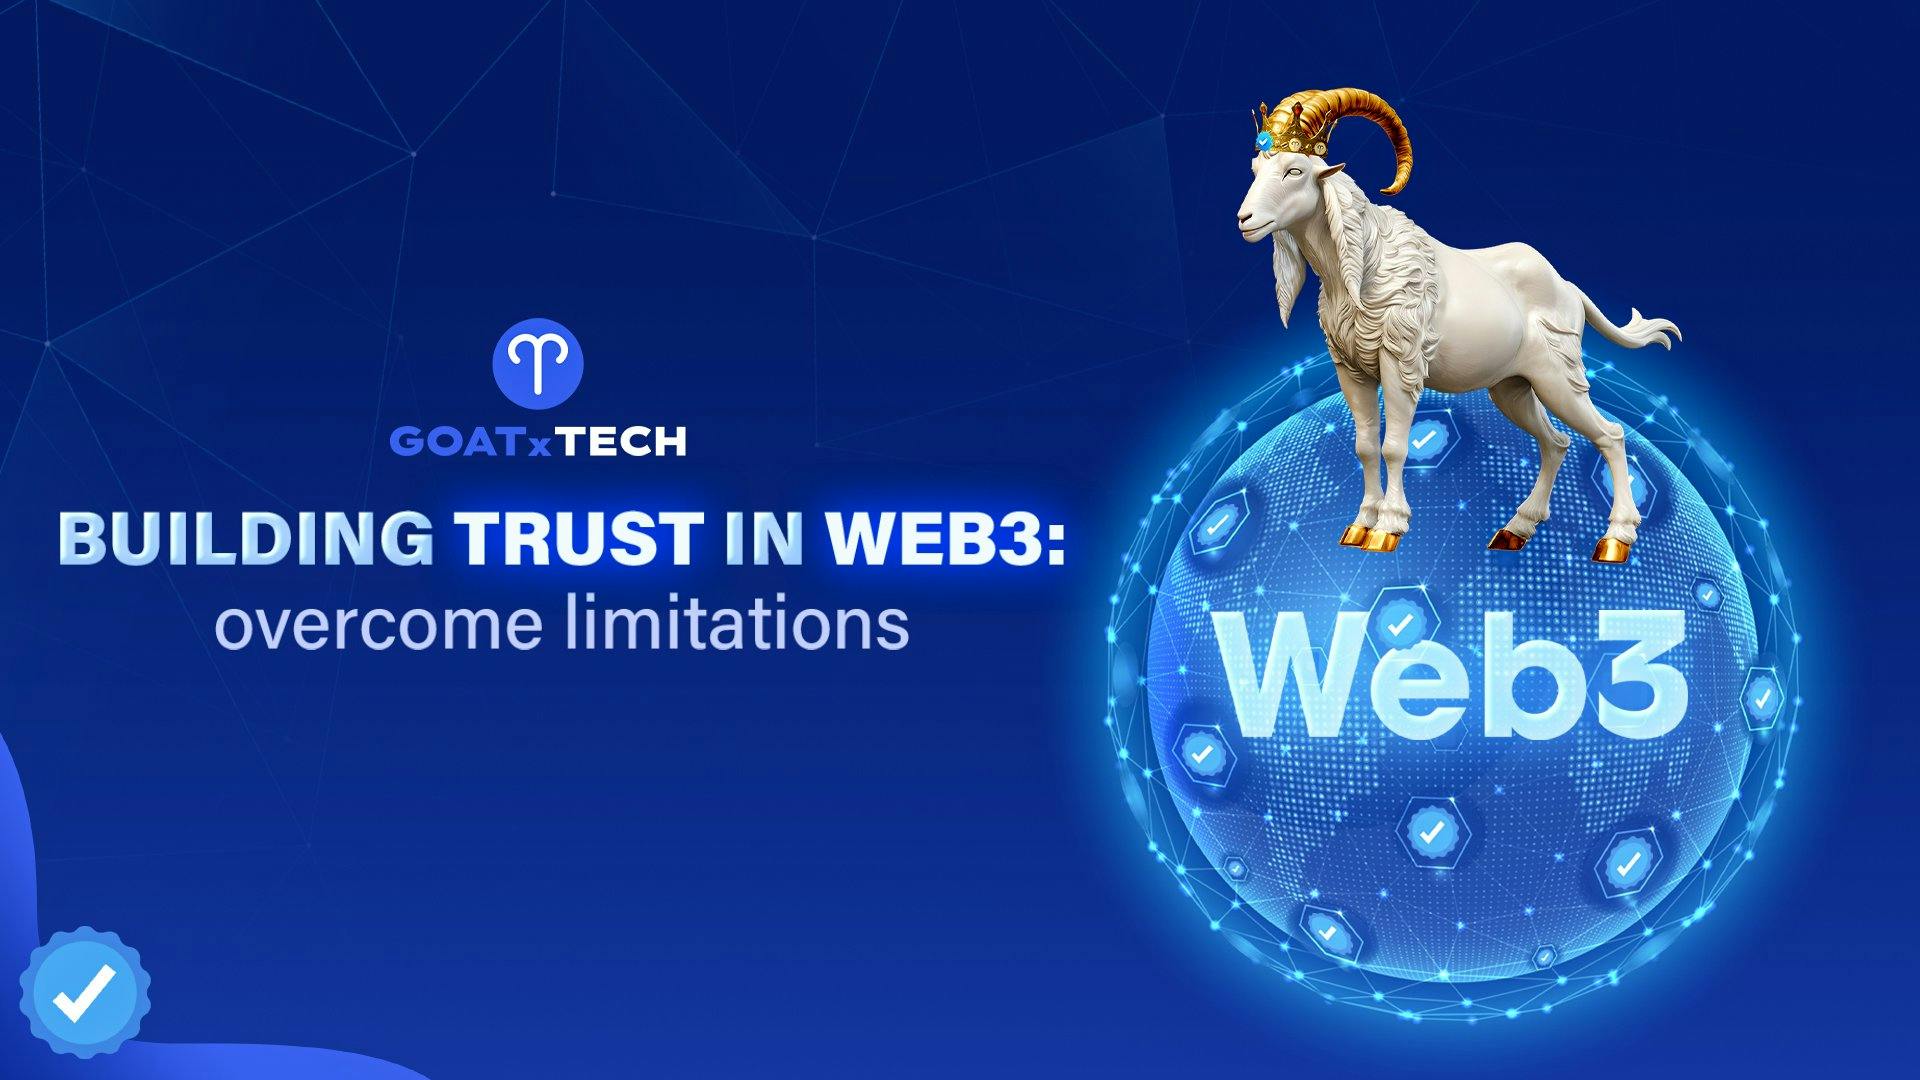 Will Goat.Tech overcome limitations in building trust in Web3?